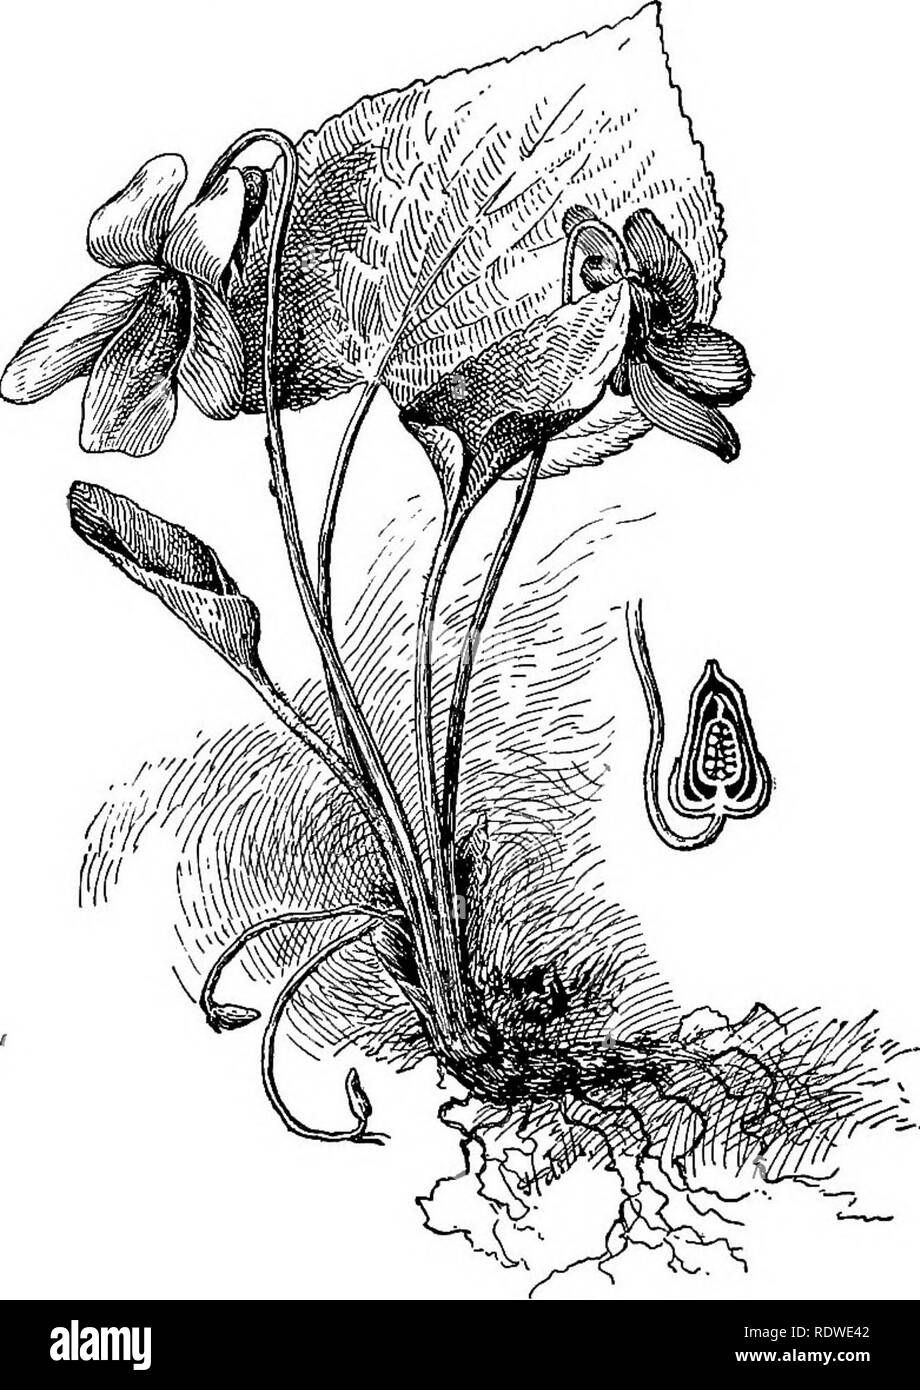 . Elementary botany. Botany. 354 ECOLOG y. i.e. the pollenation of the pistil of one flower by pollen from another, is sure to take place, if it is pollenated at all. Even in monoecious plants cross pollenation often takes place between flowers of different individuals, so that. Fig. 451. Viola cucullata; blue flowers above, cleistogamous flowers smaller and curved below. Section of pistil atright. more widely different stocks are united in the fertilized egg, and the strain is kept more vigorous than if very close or identical strains were united. 652. But there are many flowers in which both Stock Photo